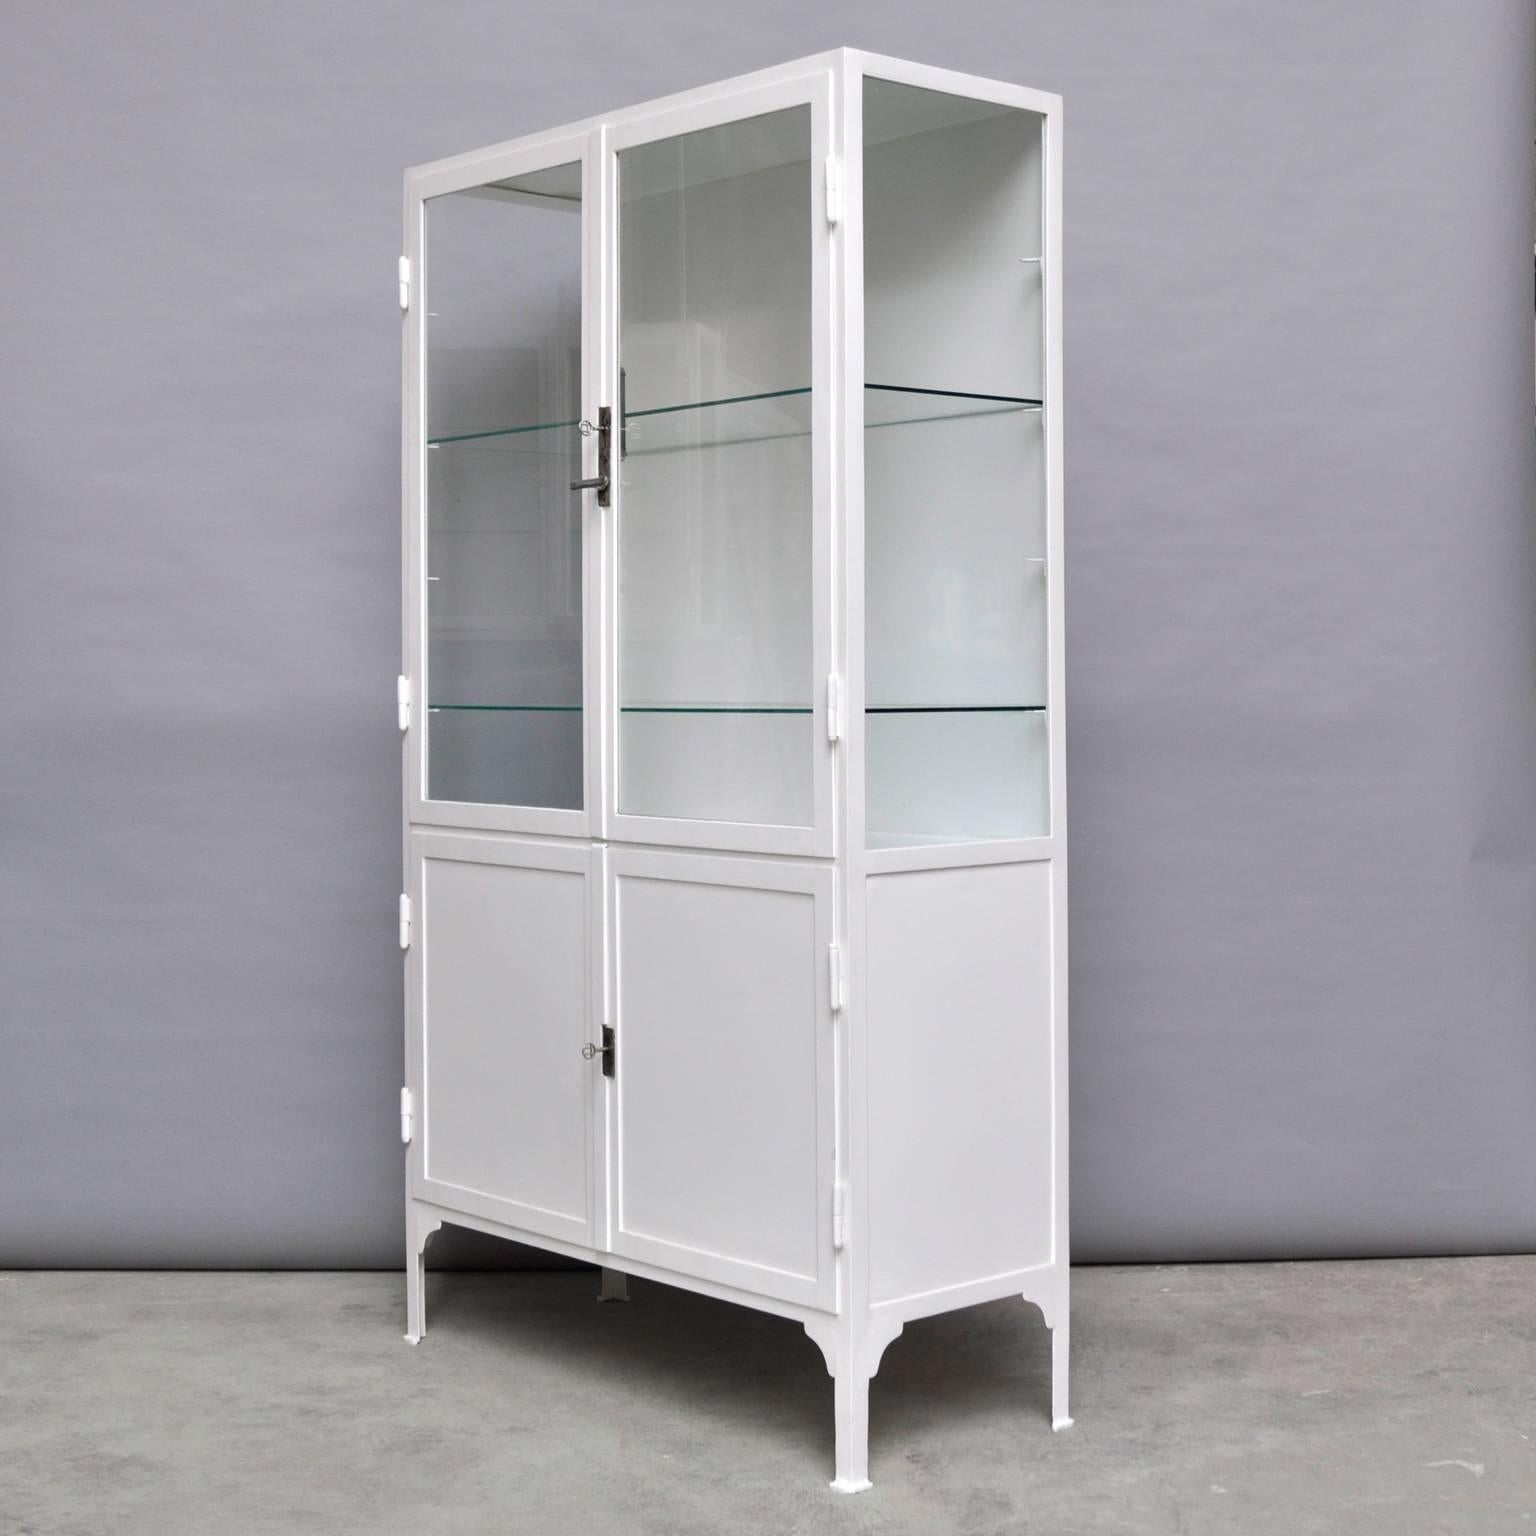 Vintage medical cabinet from the 1940s in excellent condition. The cabinet is produced in Hungary. In the top part, two glass shelves (four possible), in the lower part one steel shelf. Made of thick iron. The glass in the cabinet is the original